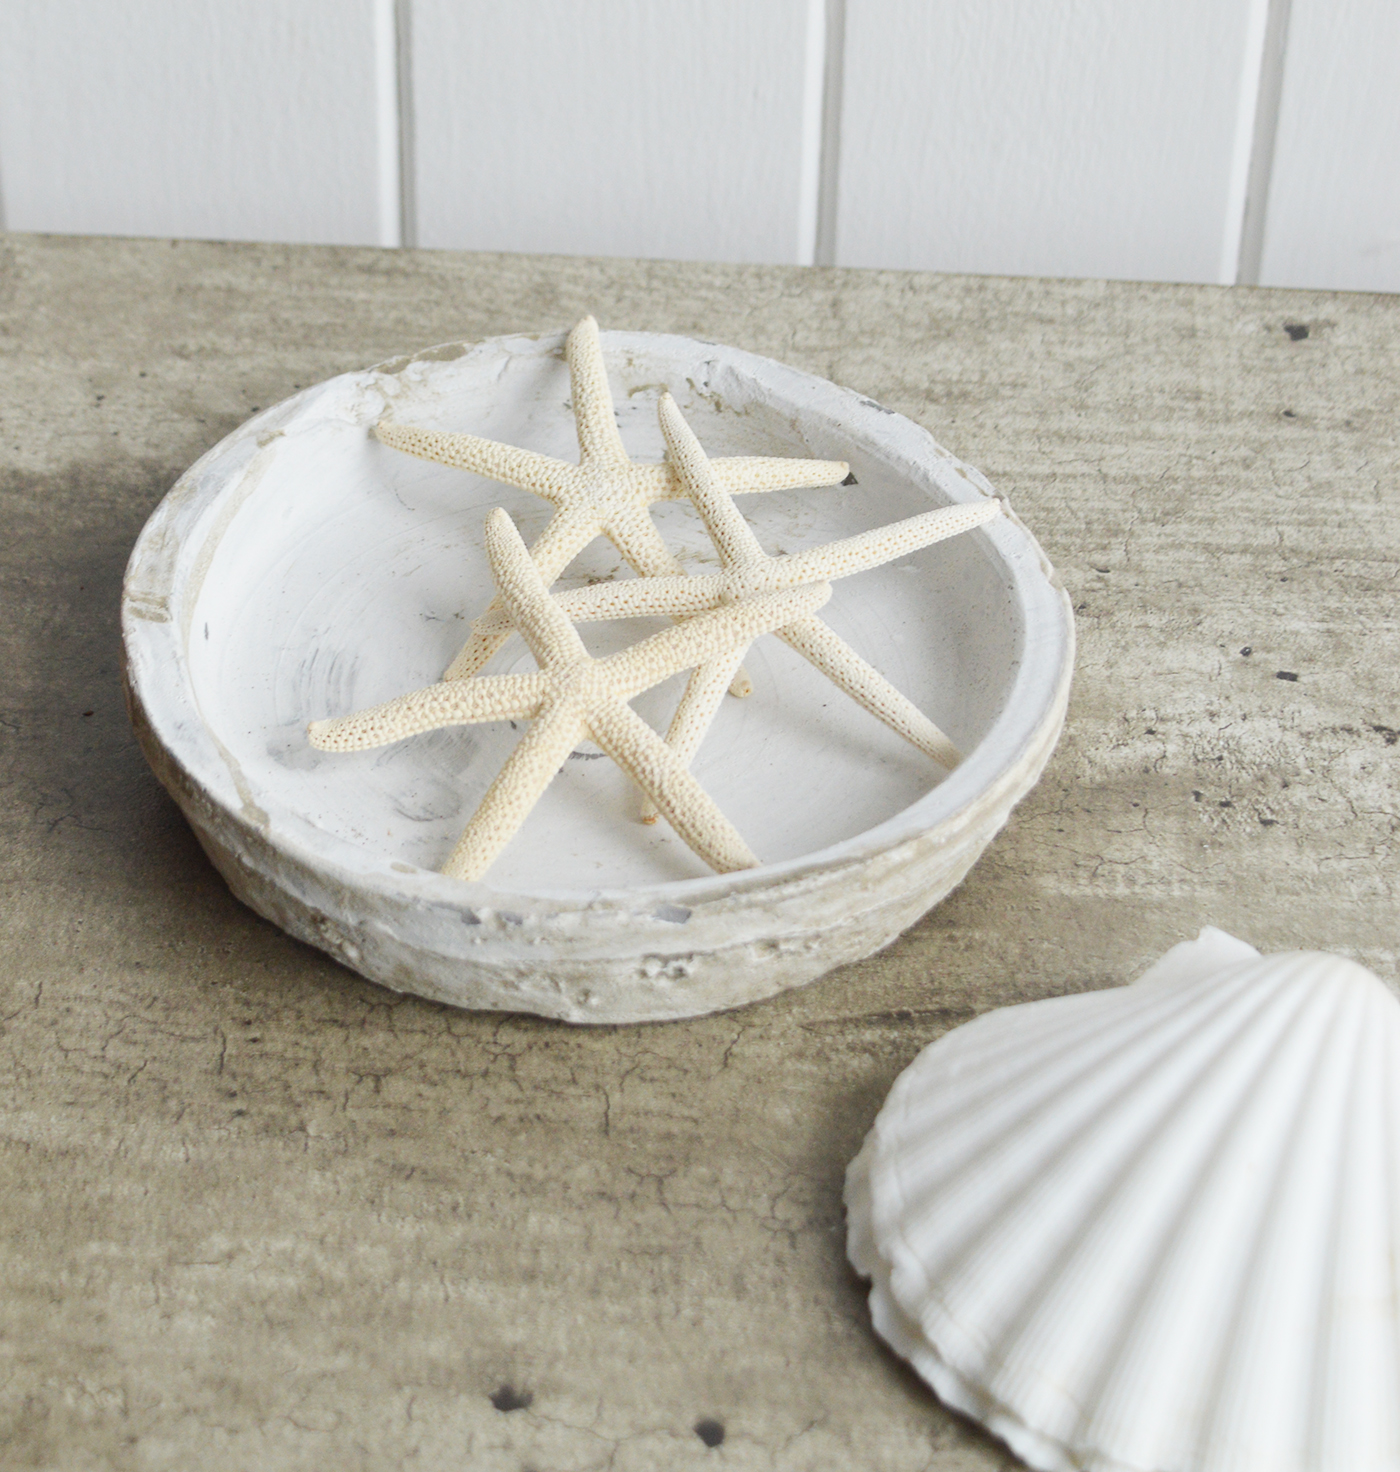 Nautical, coastal and beach home decor accessories and Furniture from The White Lighthouse Furniture - Decorative Starfish and Shells